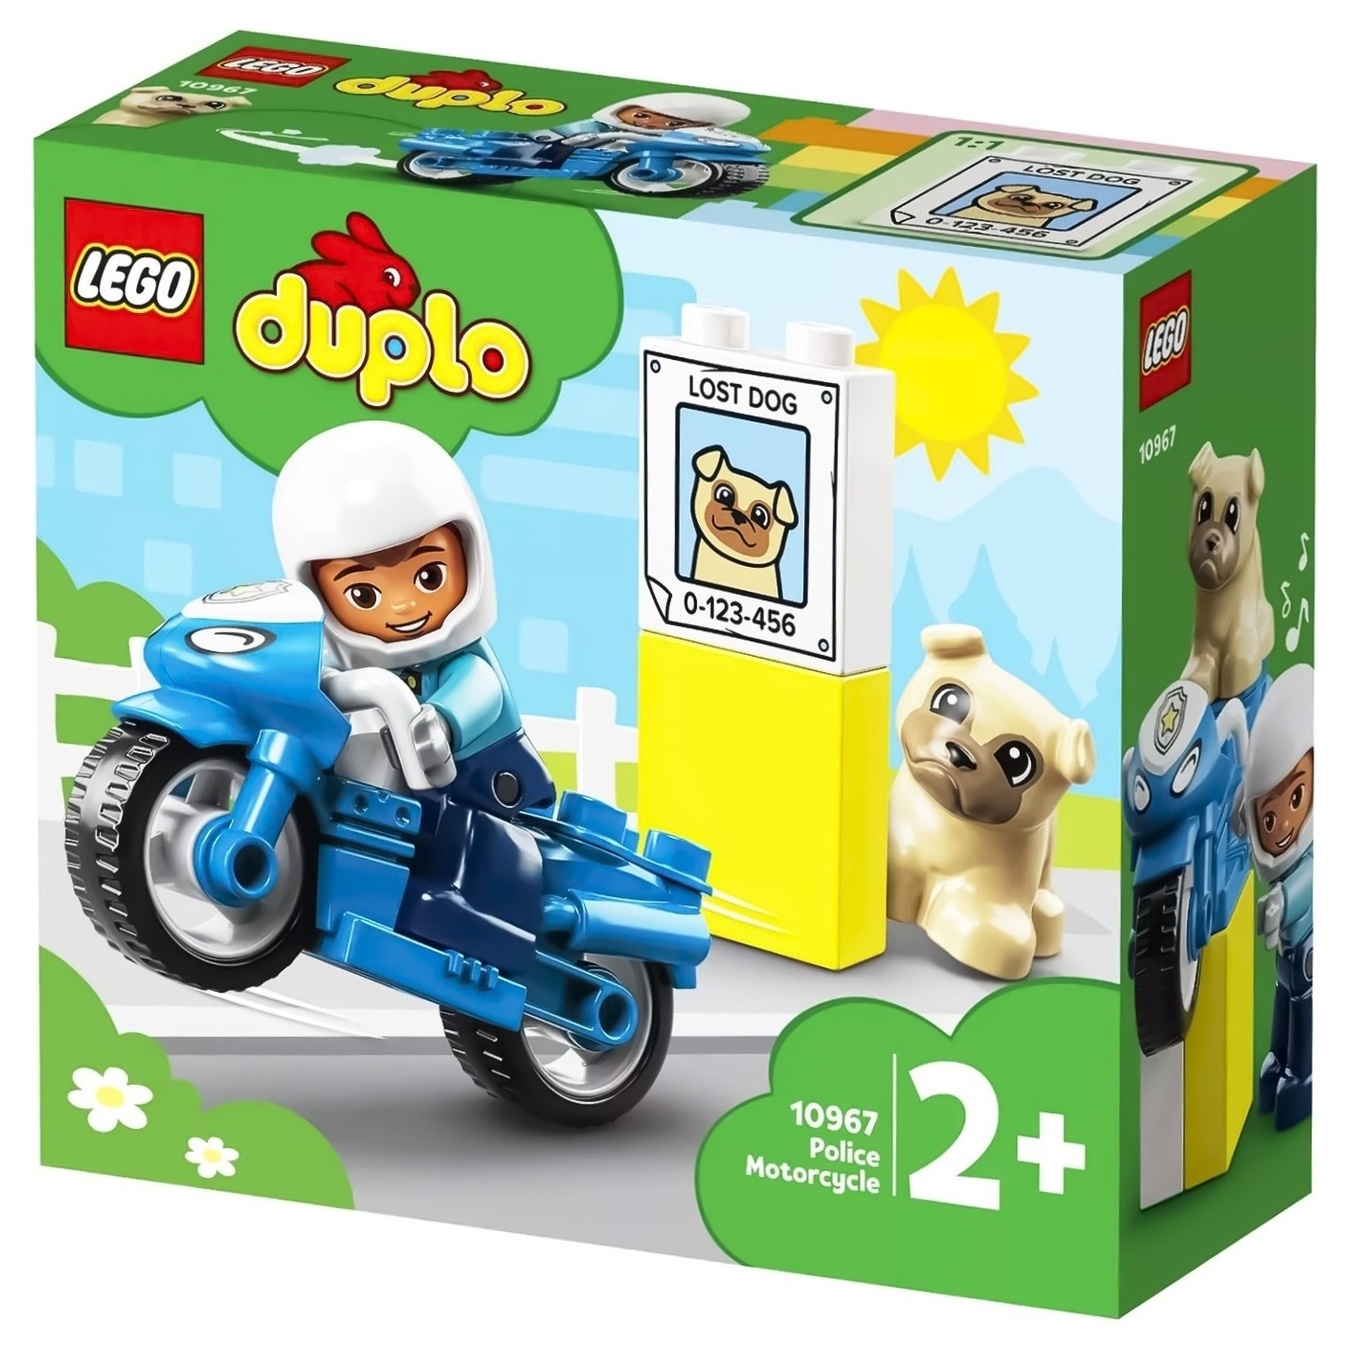 Constructor Lego Police motorcycle Town